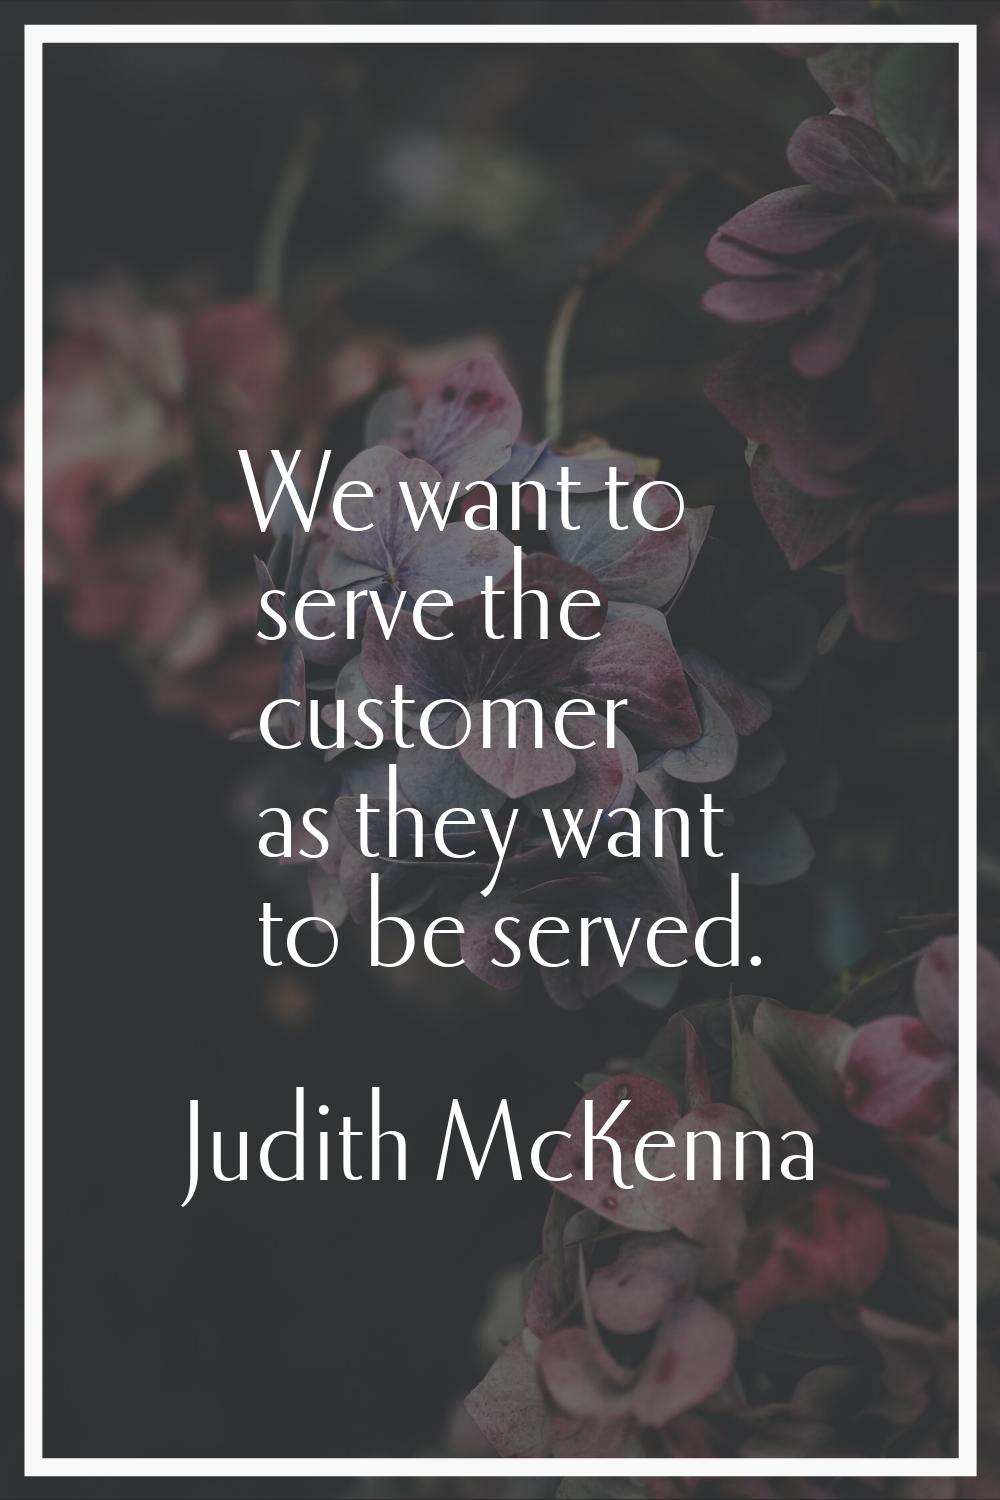 We want to serve the customer as they want to be served.